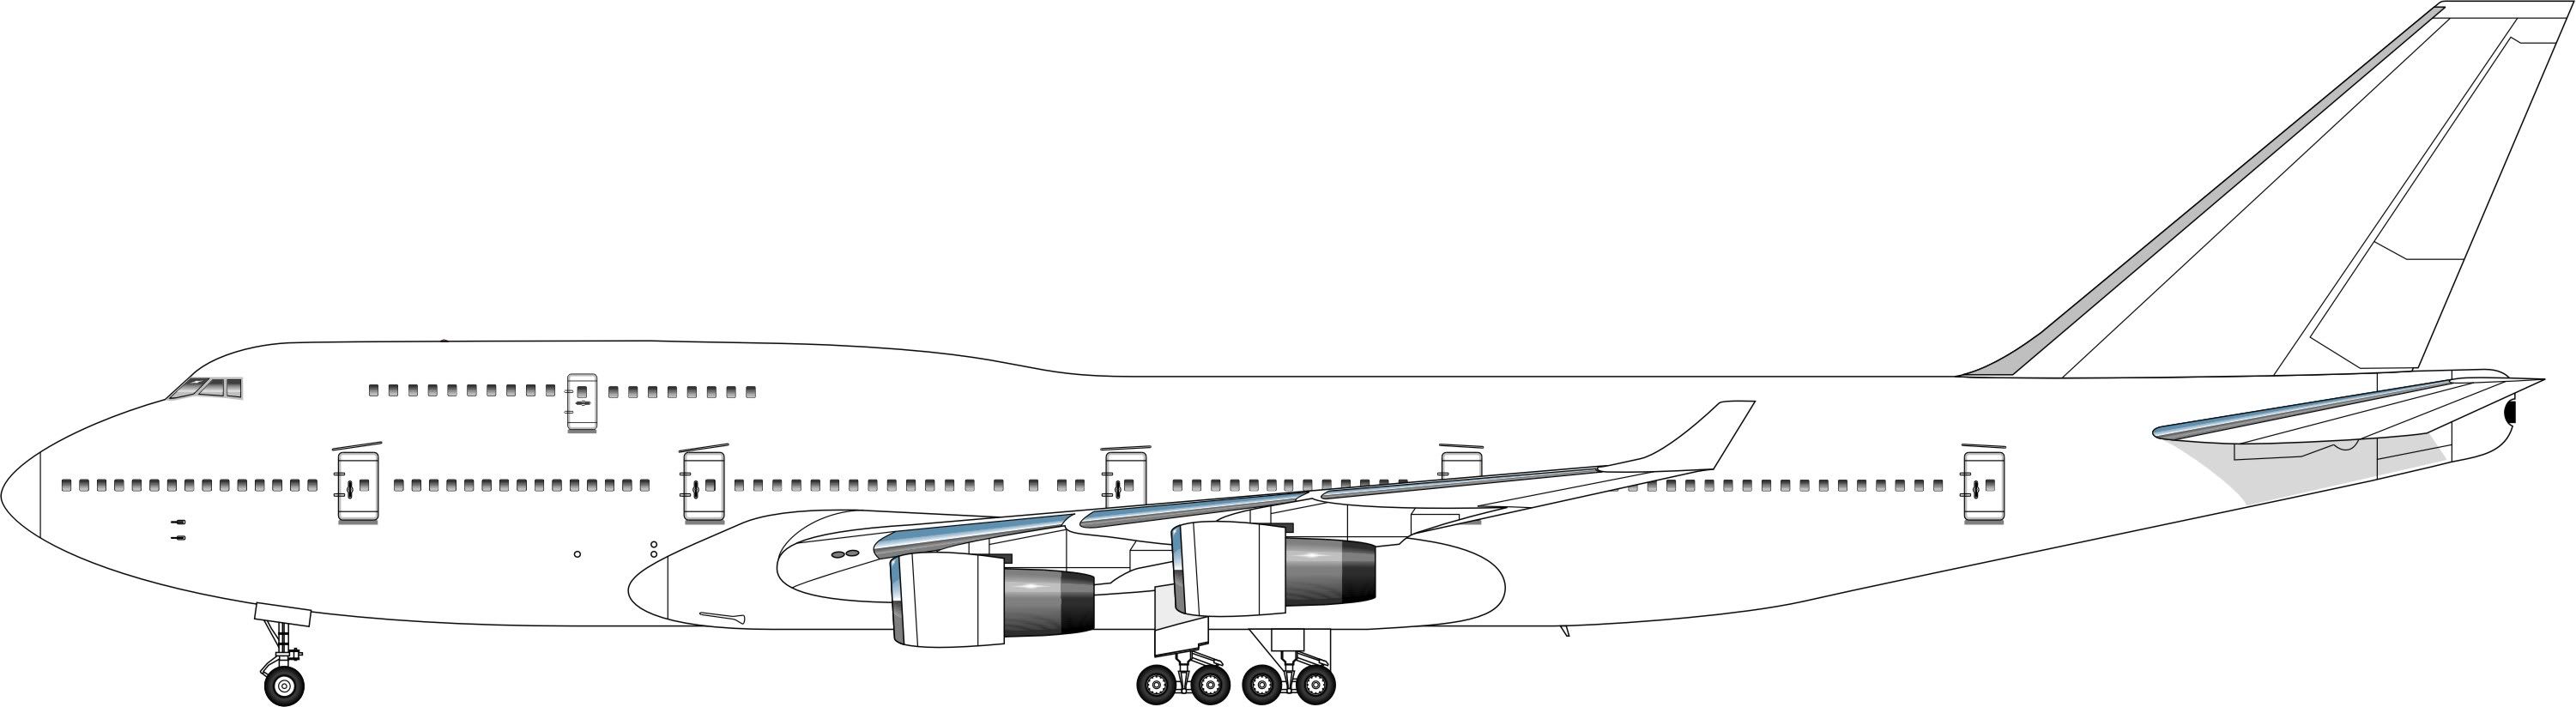 Boeing 747 Technical Drawing